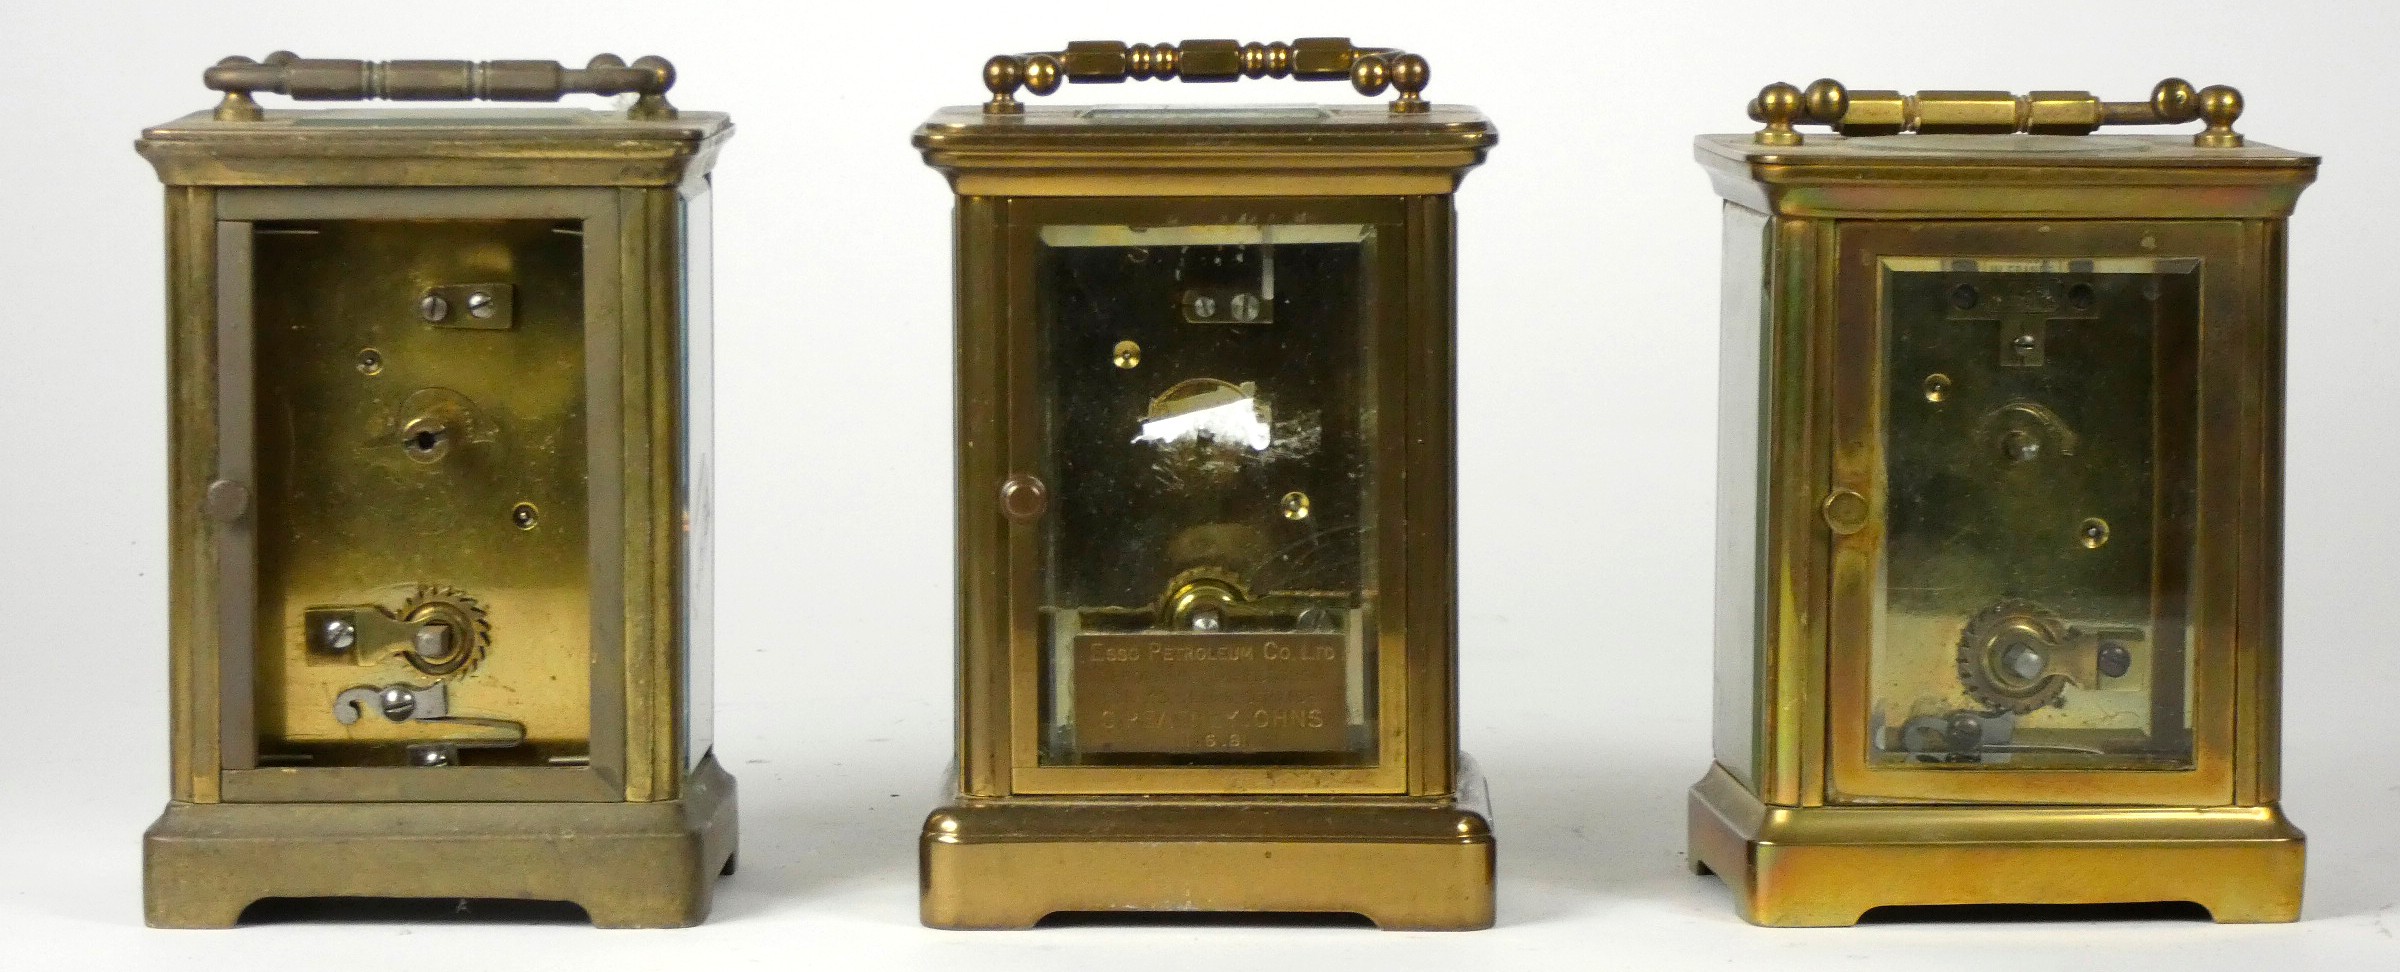 Three French mid 20th Century brass carriage clocks, white enameled dials with Roman numerals, - Image 3 of 3